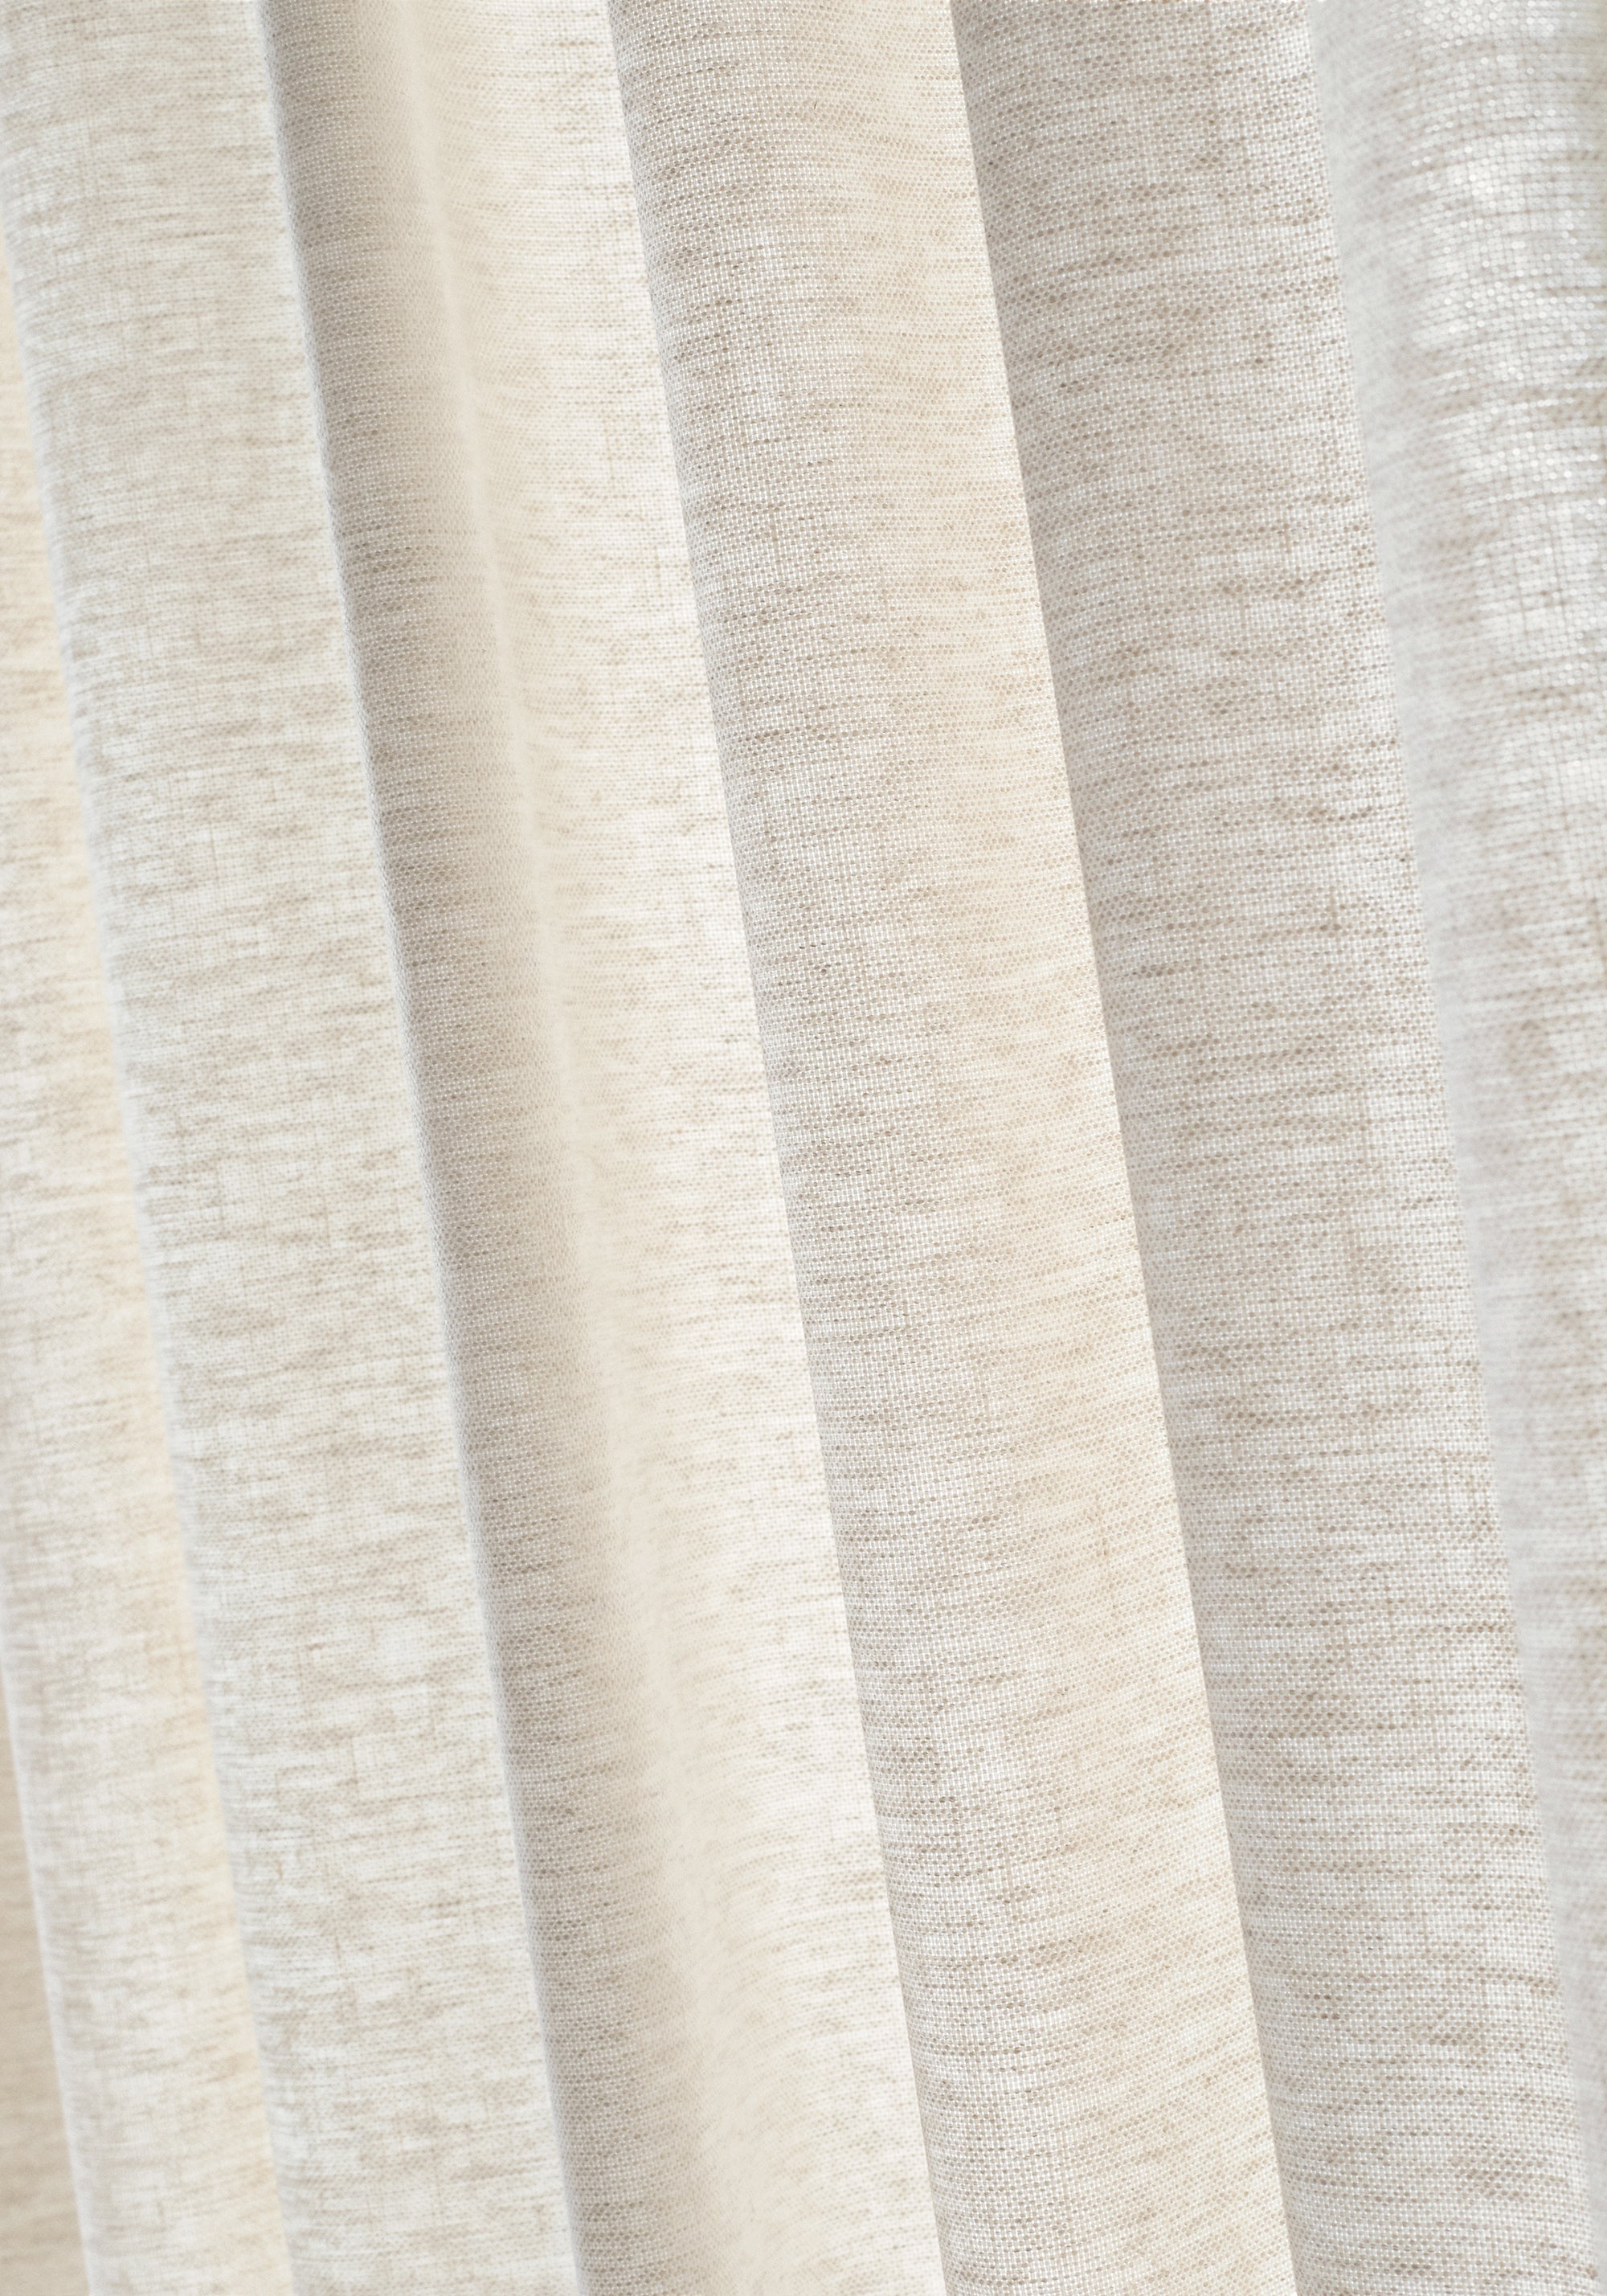 Detail of Dawn Linen wide woven fabric draperies, of the Palisades woven fabric collection, in waterfall color - pattern number W74203